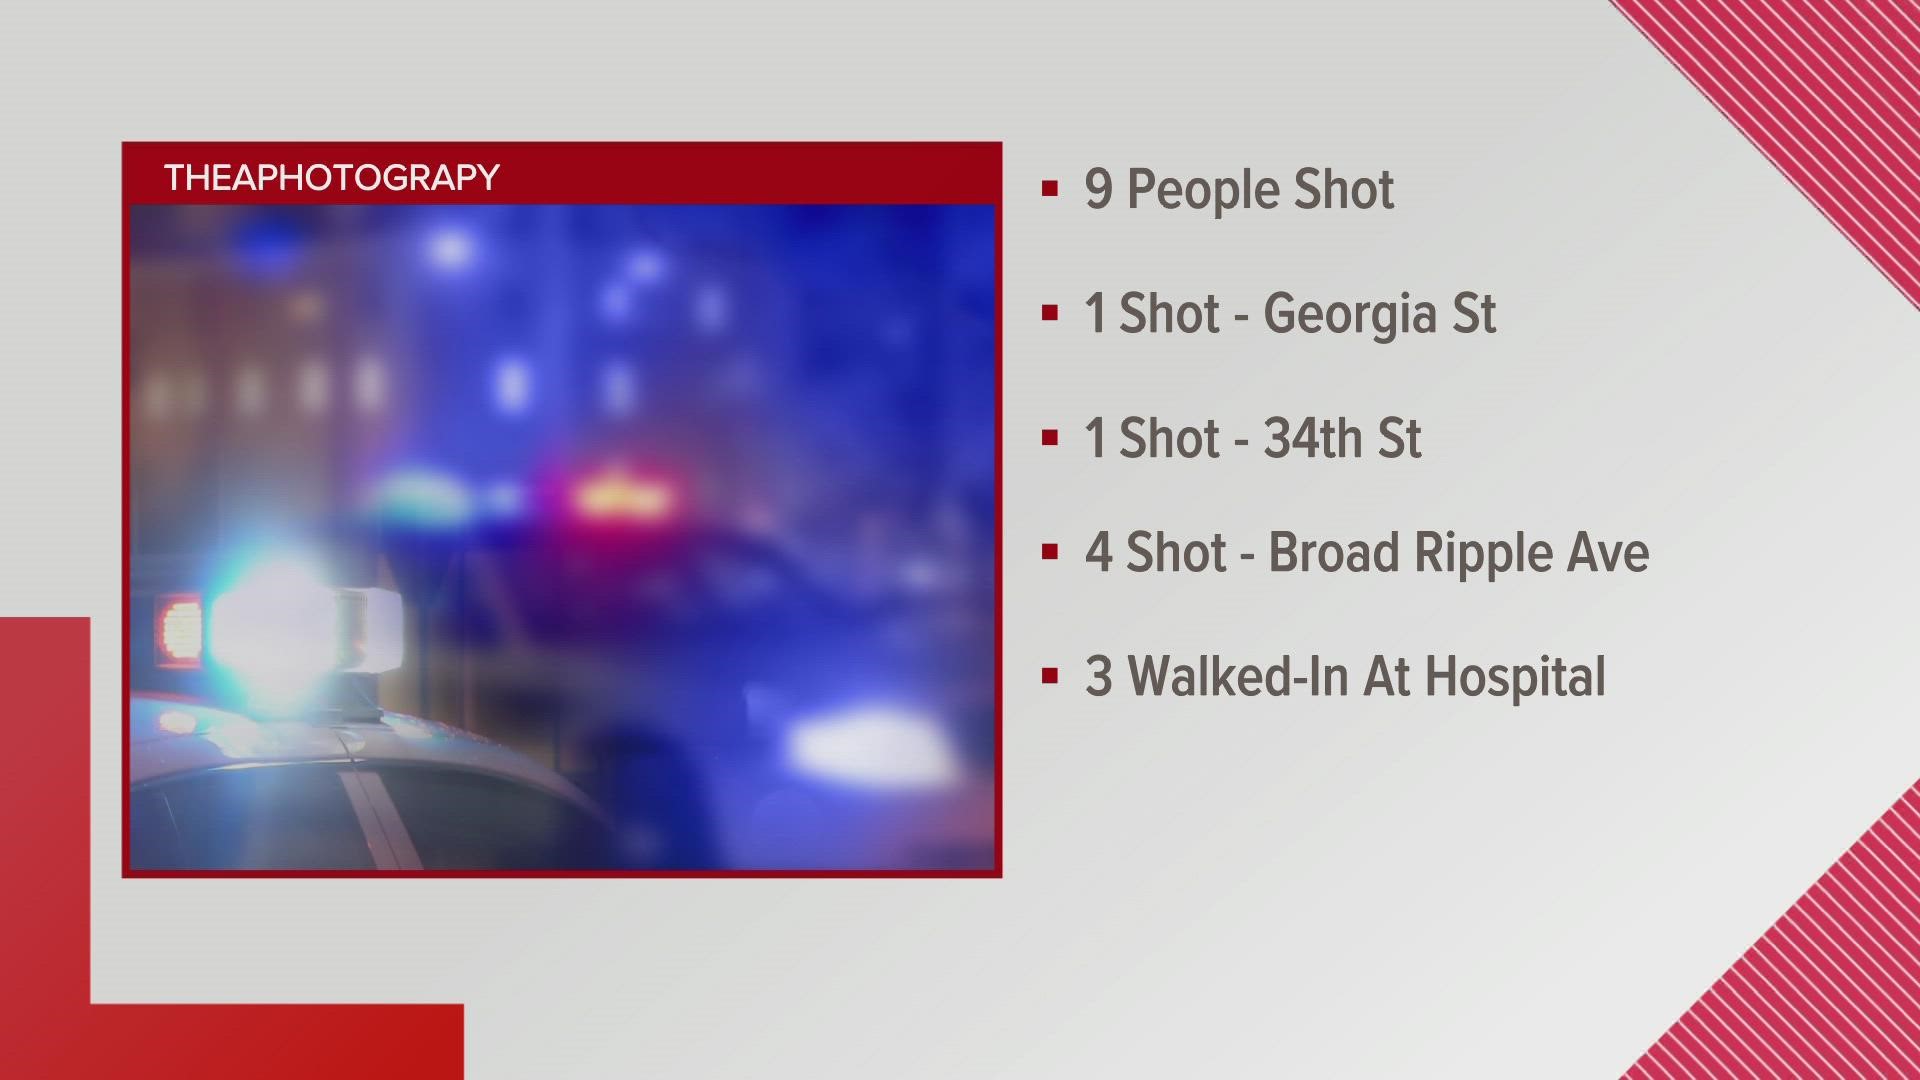 IMPD is investigating a rash of shootings during the overnight and early morning hours Sunday that sent nine people to area hospitals with gunshot wounds.